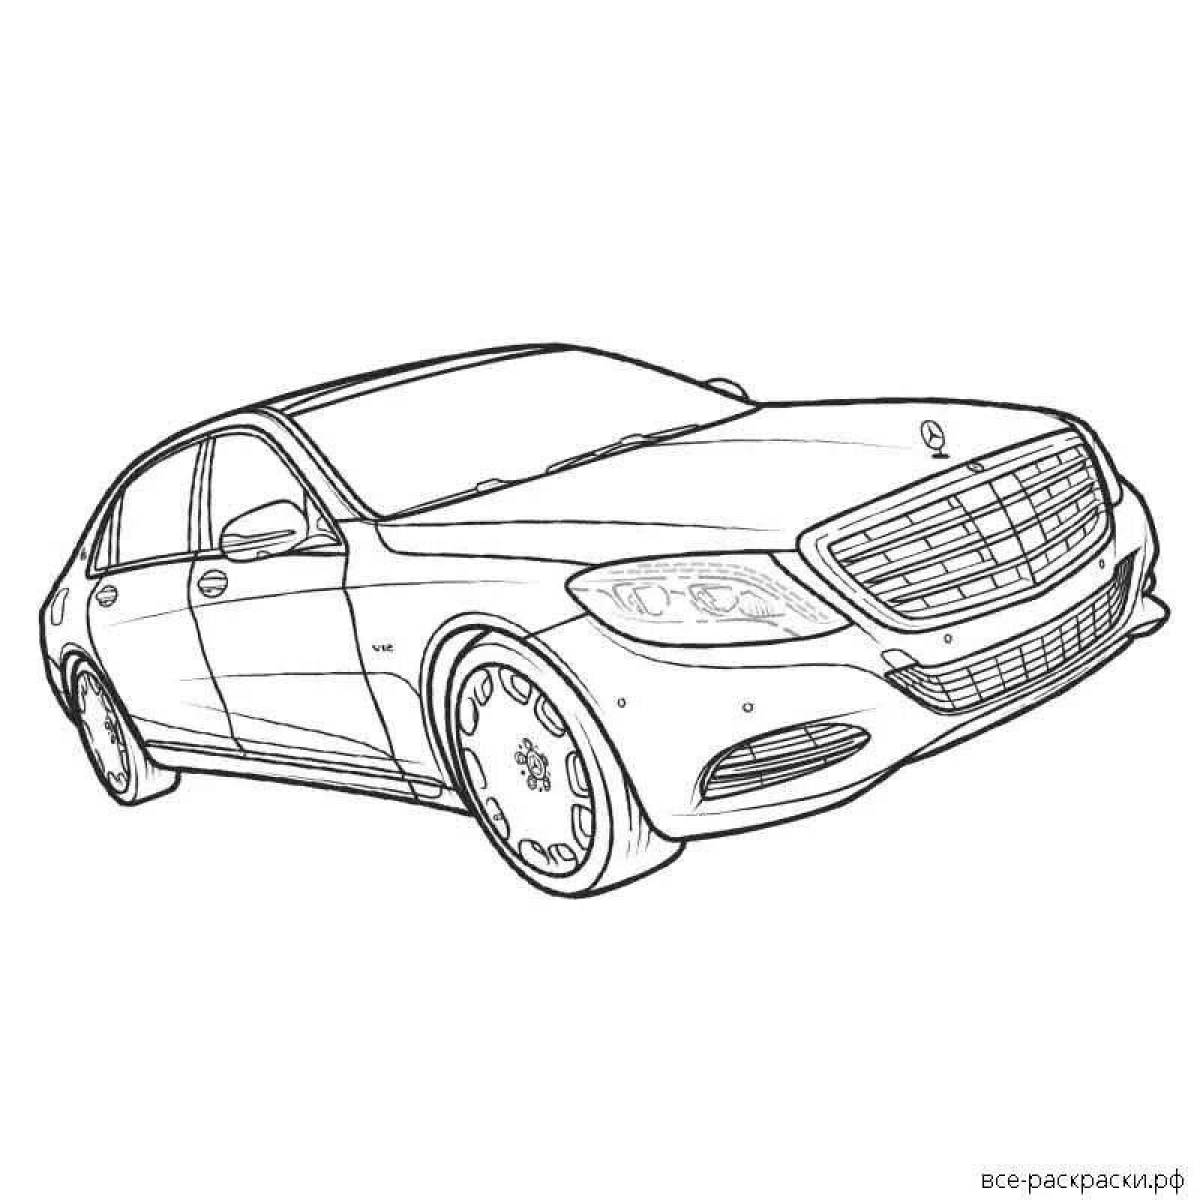 Amazing mercedes maybach coloring book